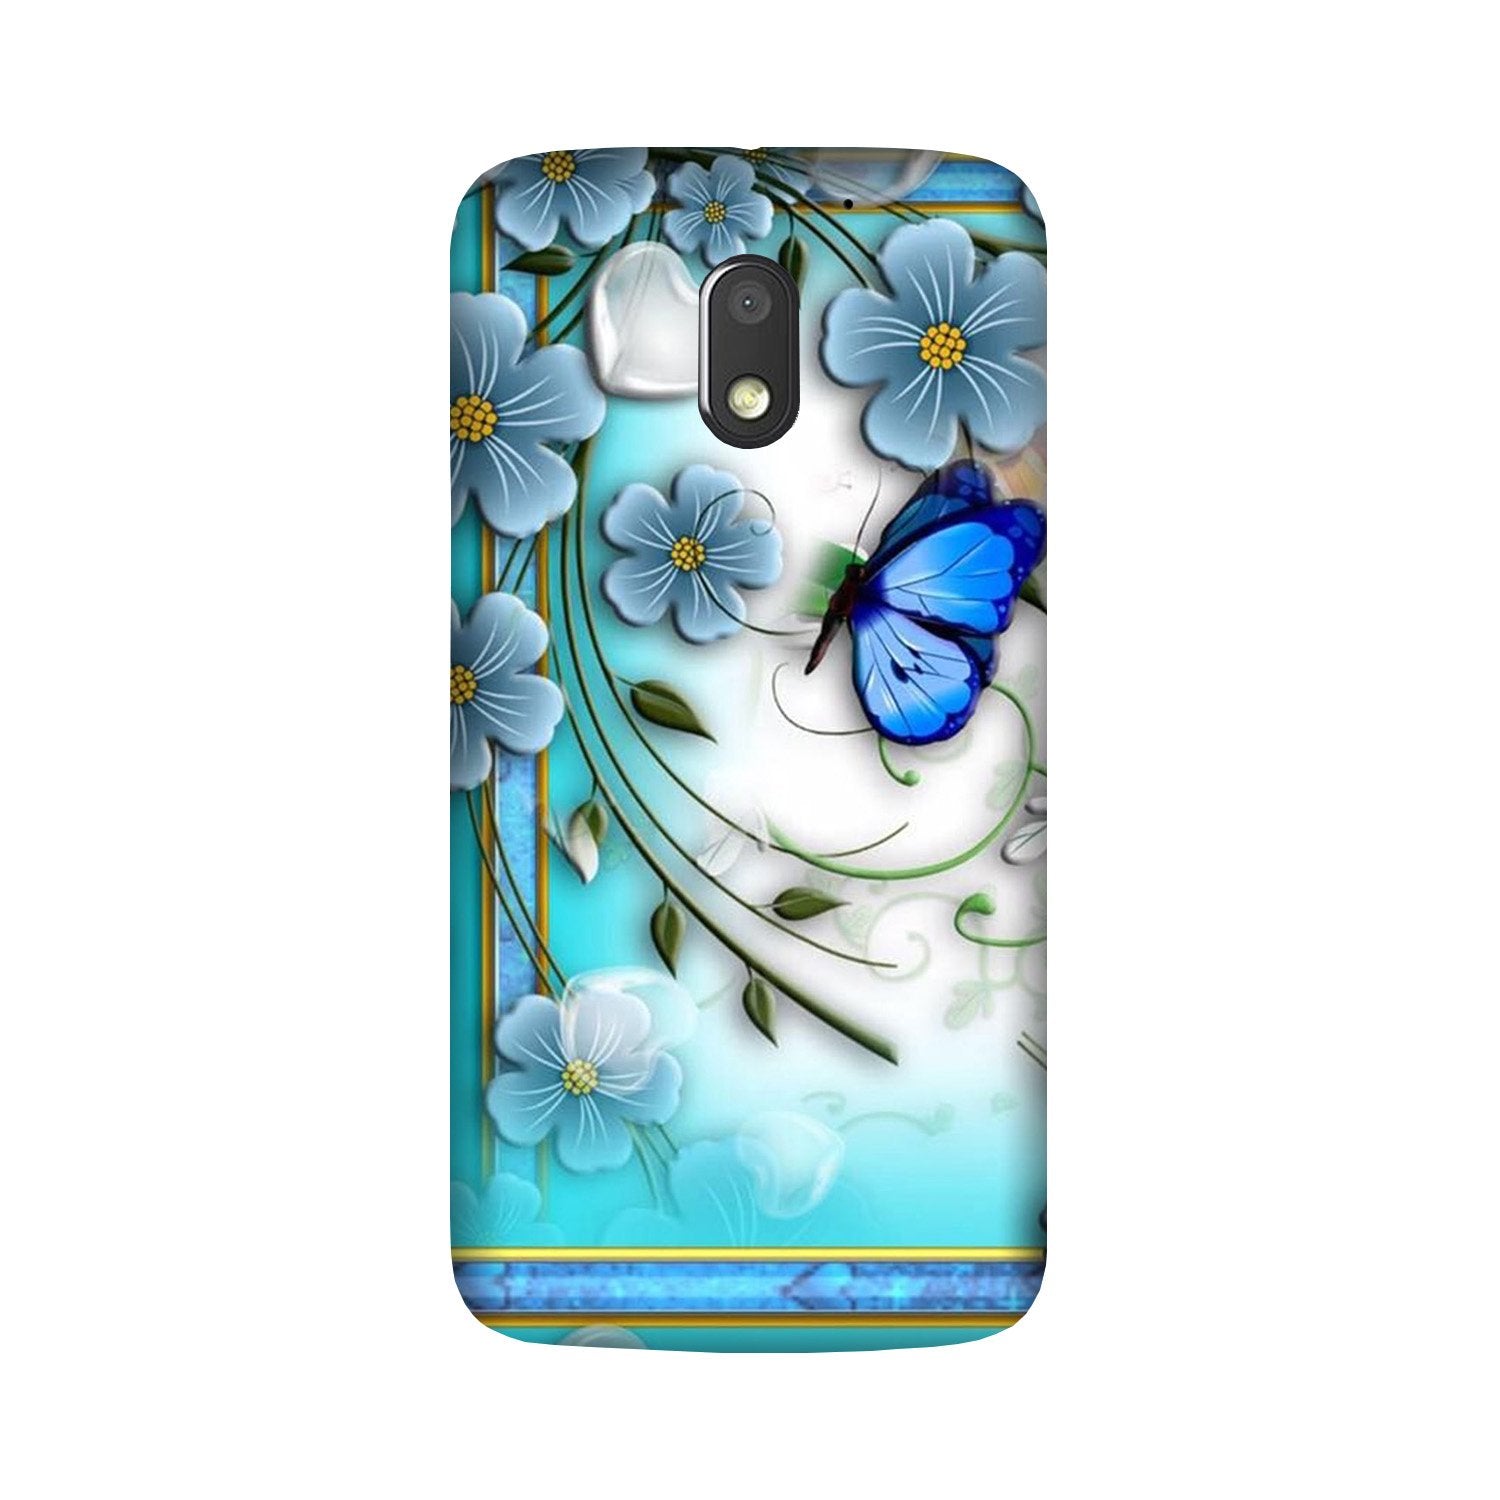 Blue Butterfly Case for Moto G4 Play